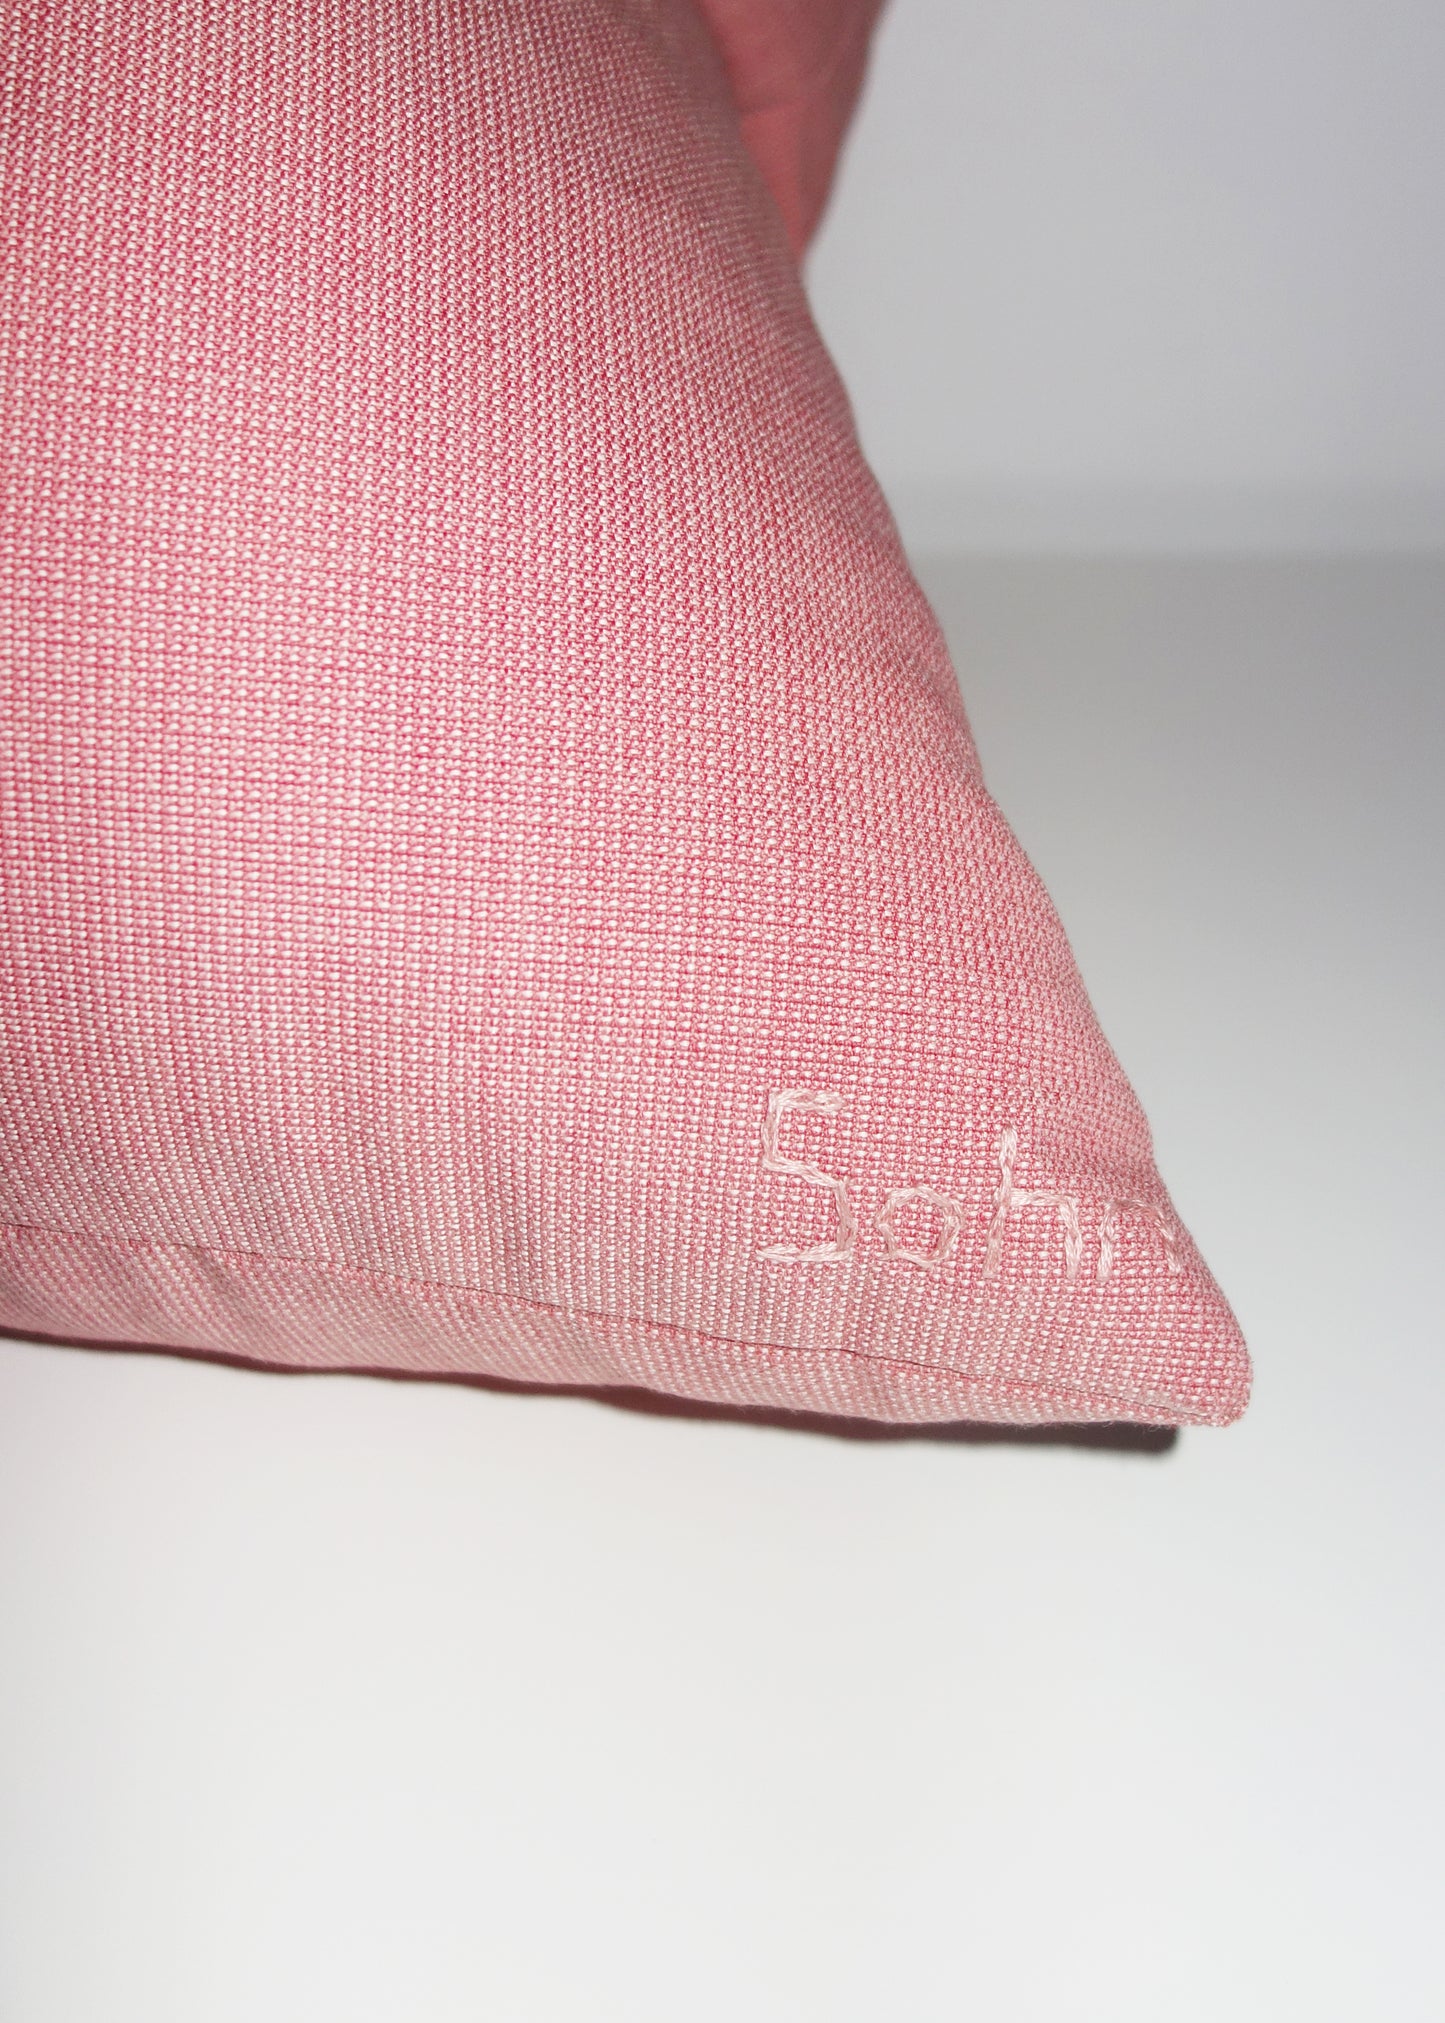 Soft Contact Pillow (Made To Order)